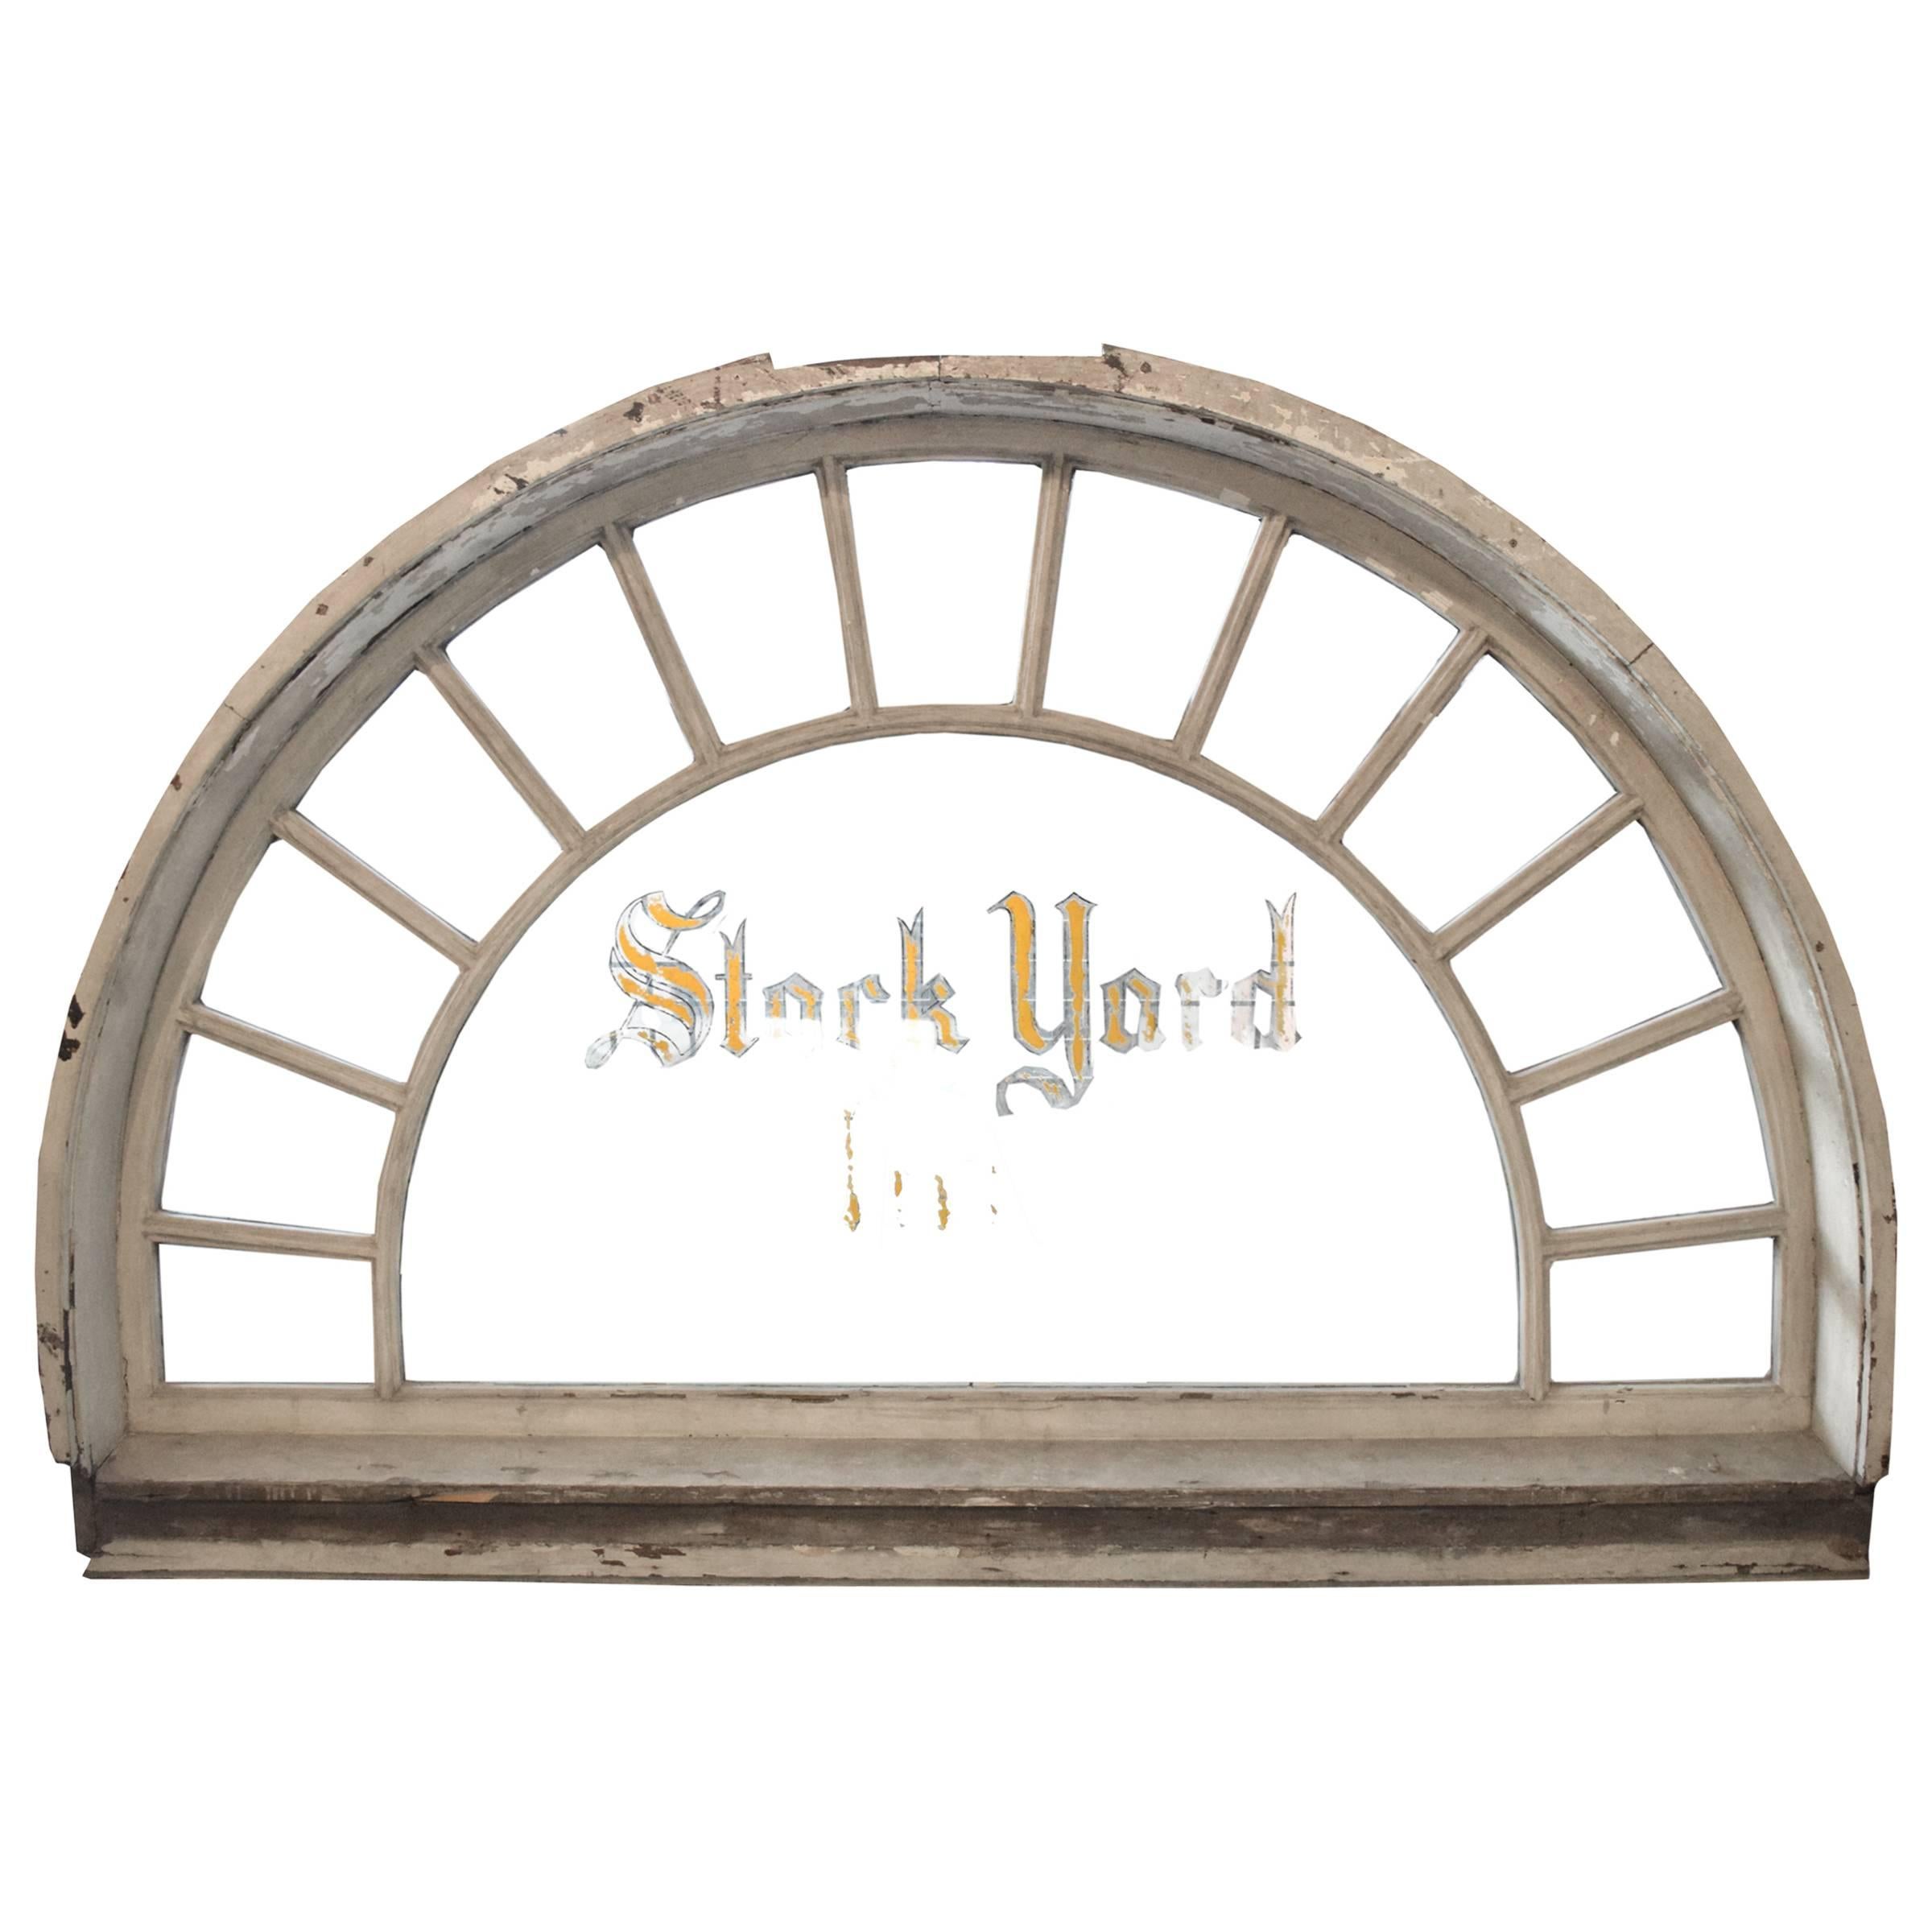 Entry Transom from the Stock Yard Inn, Chicago